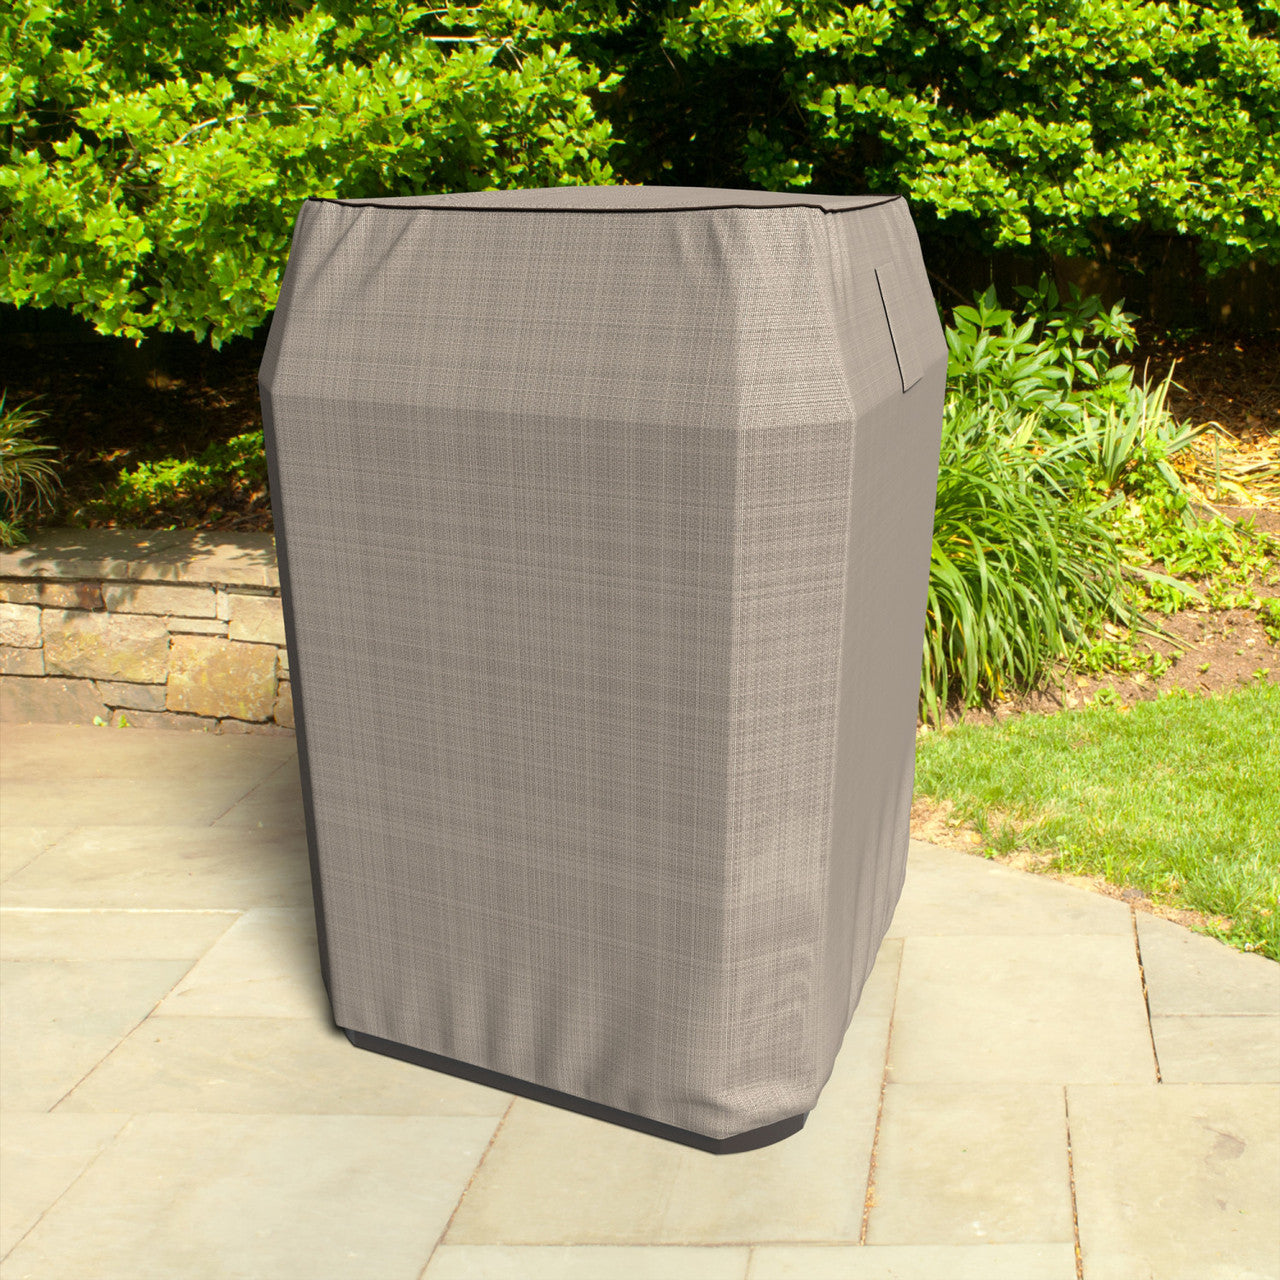 Budge Industries English Garden Square AC Cover